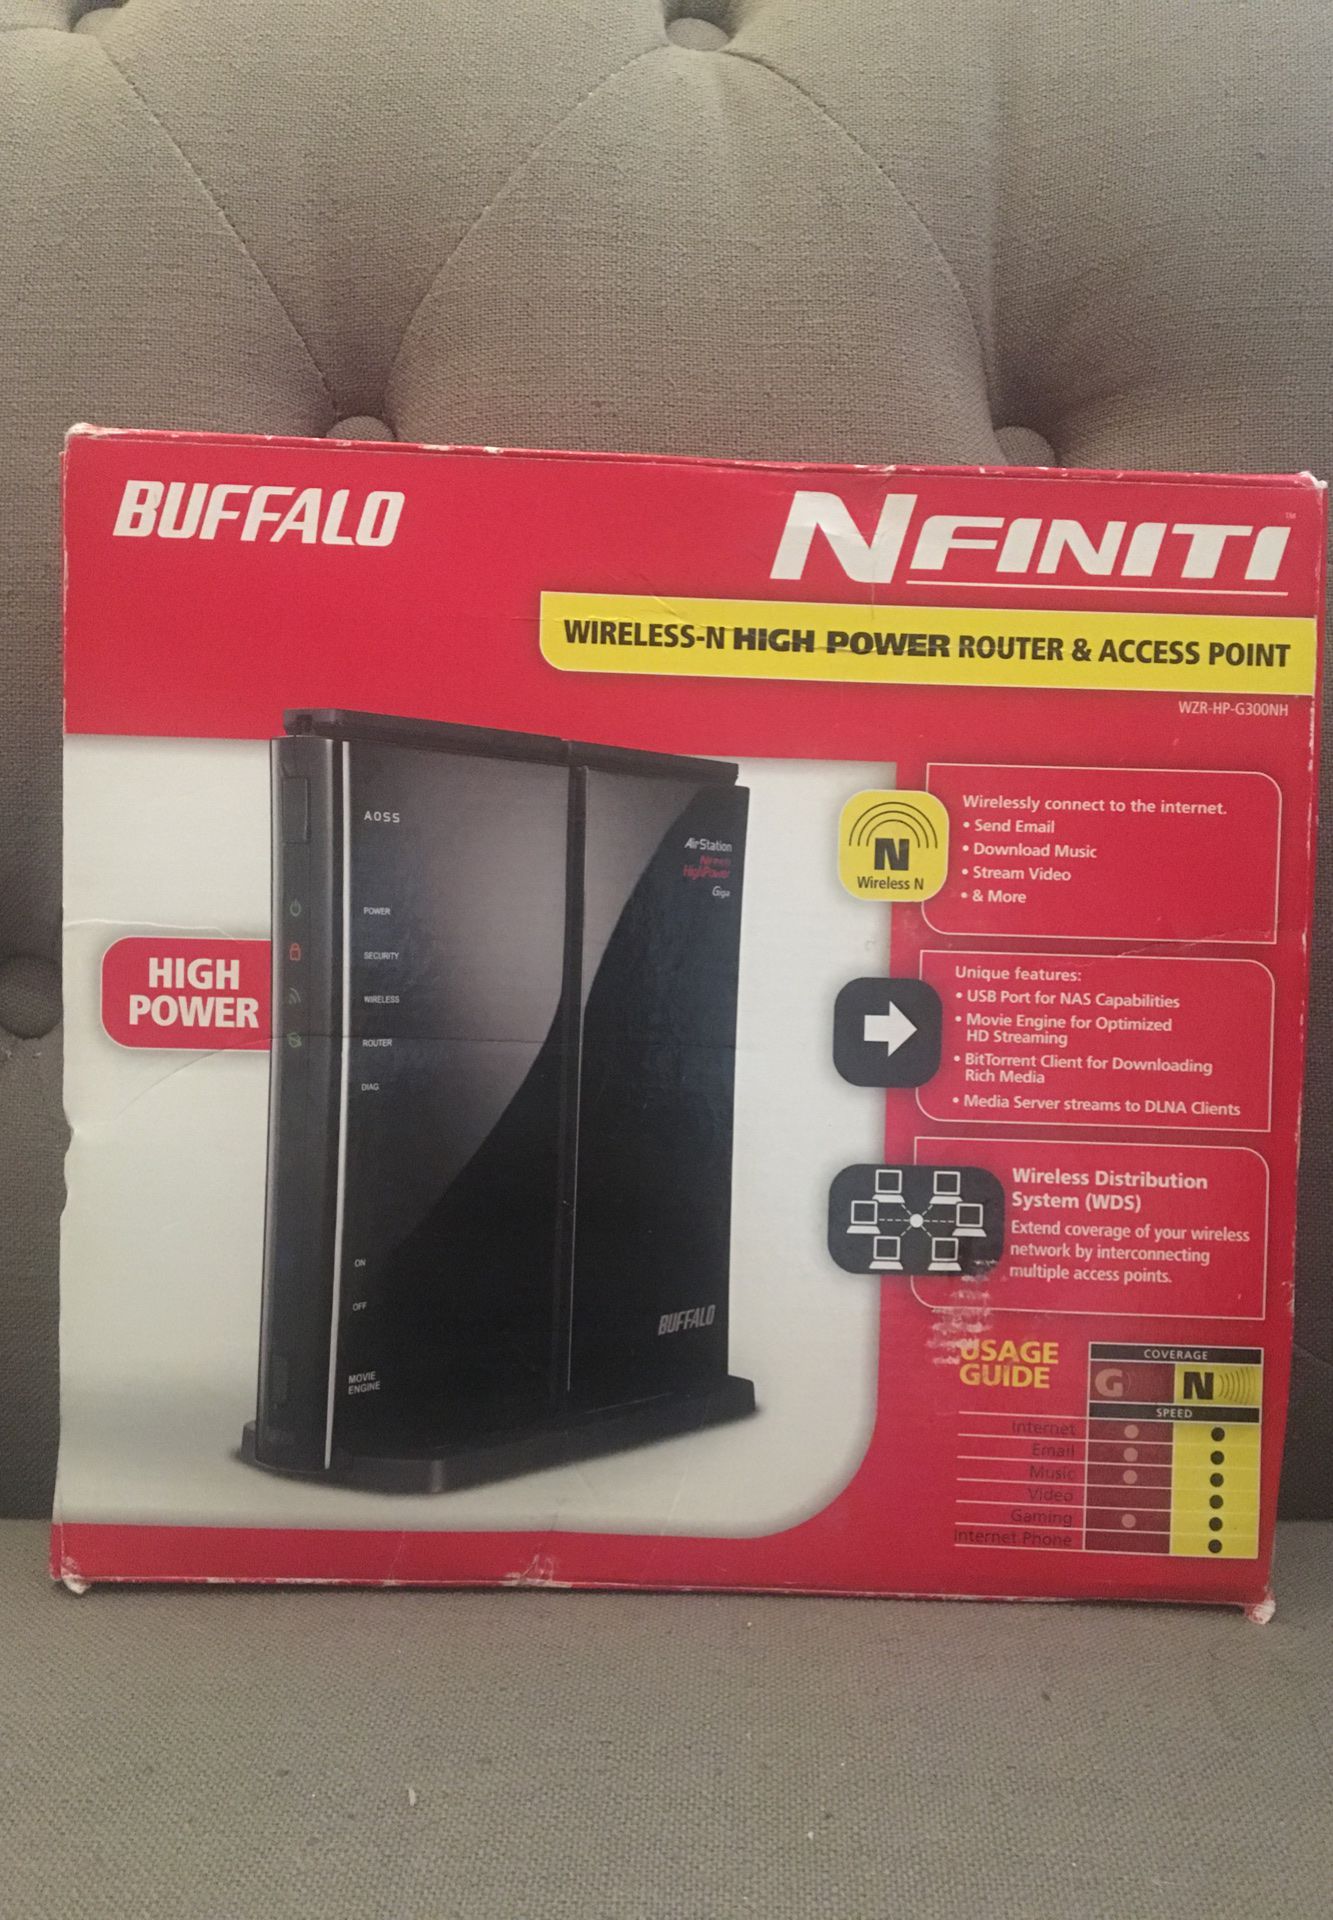 NFINITI Wireless-N High Power Router and Access Point